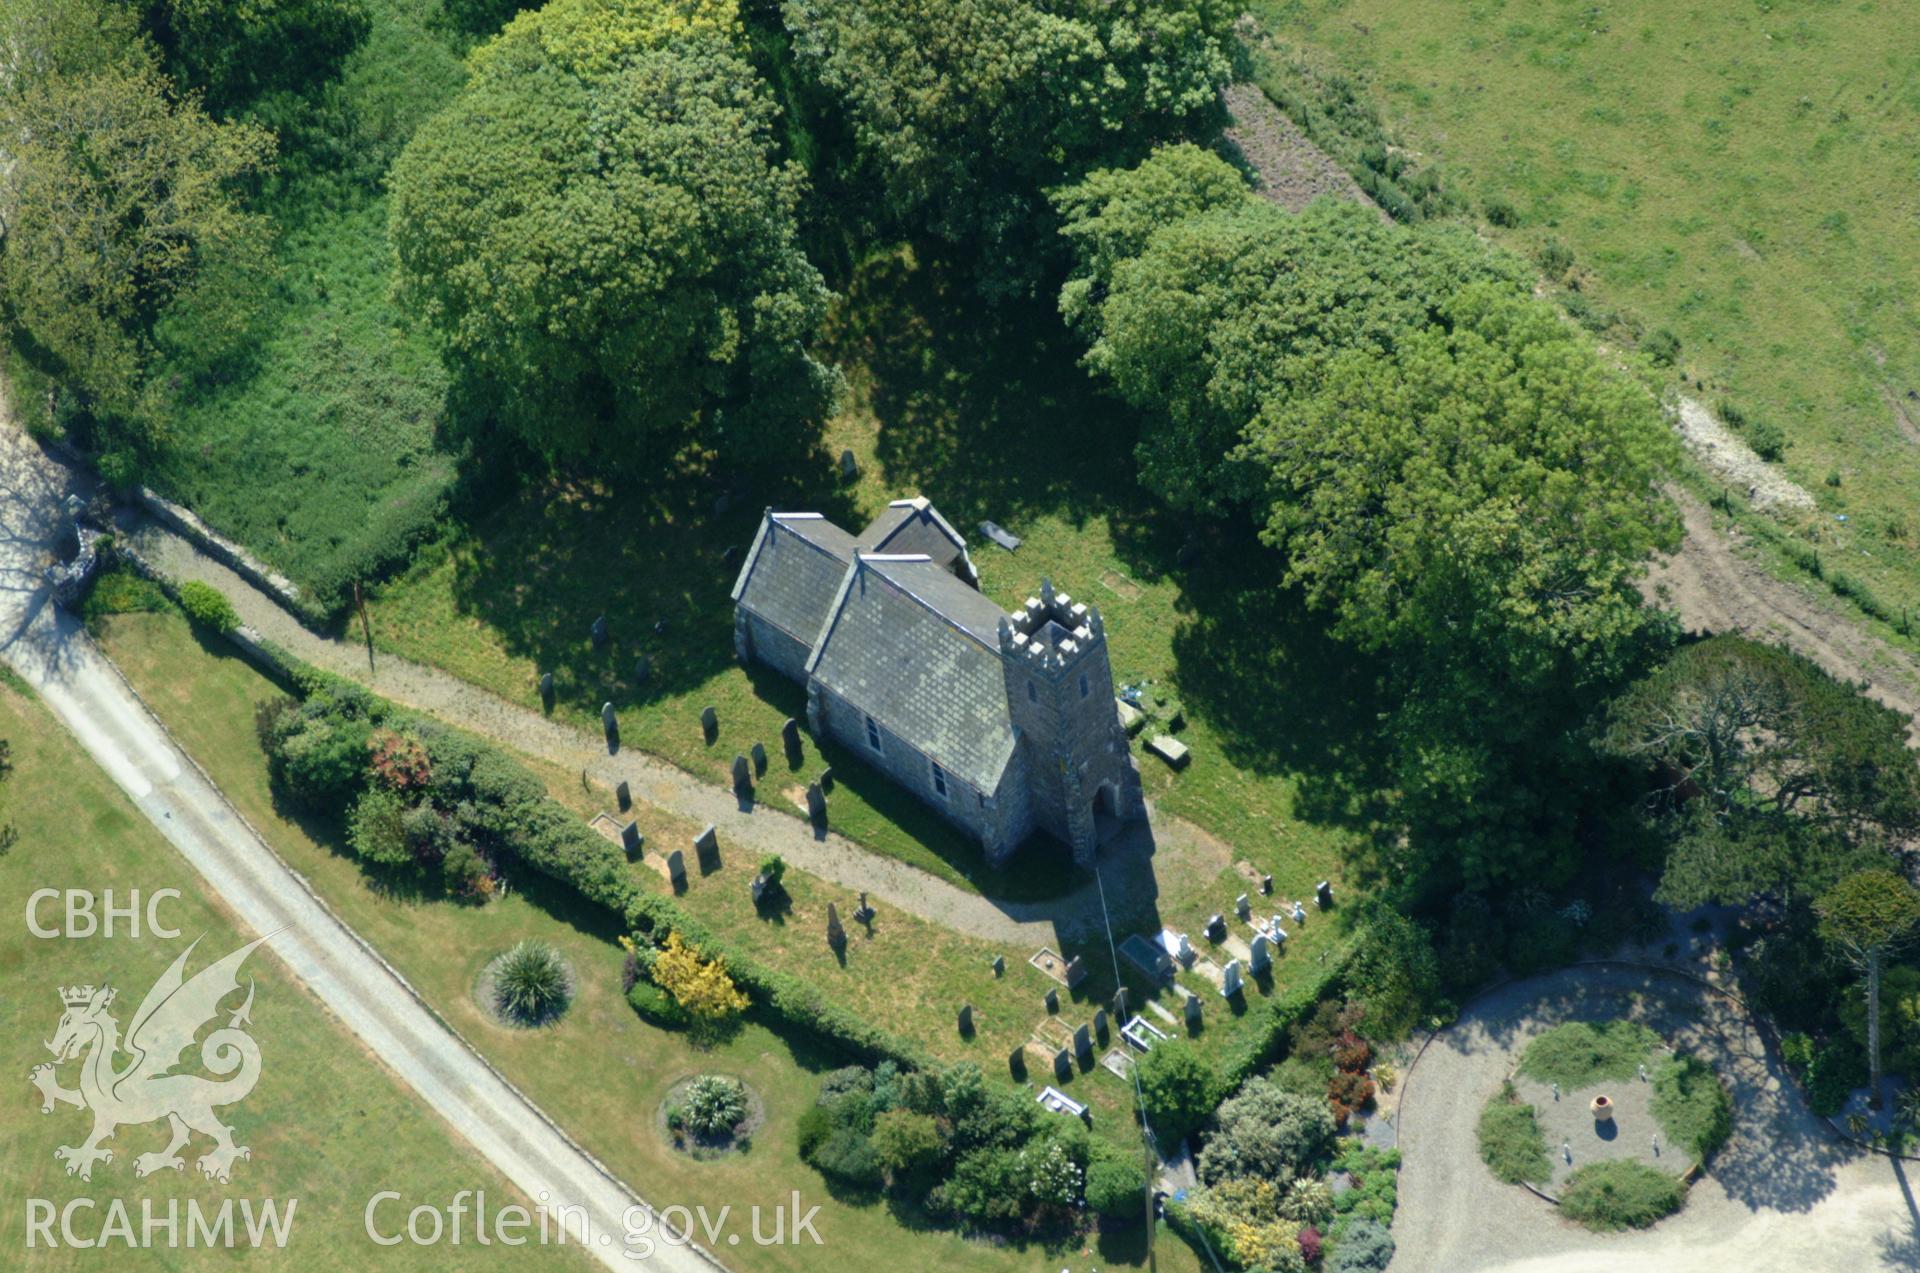 RCAHMW colour oblique aerial photograph of St Cwrda's Church taken on 25/05/2004 by Toby Driver